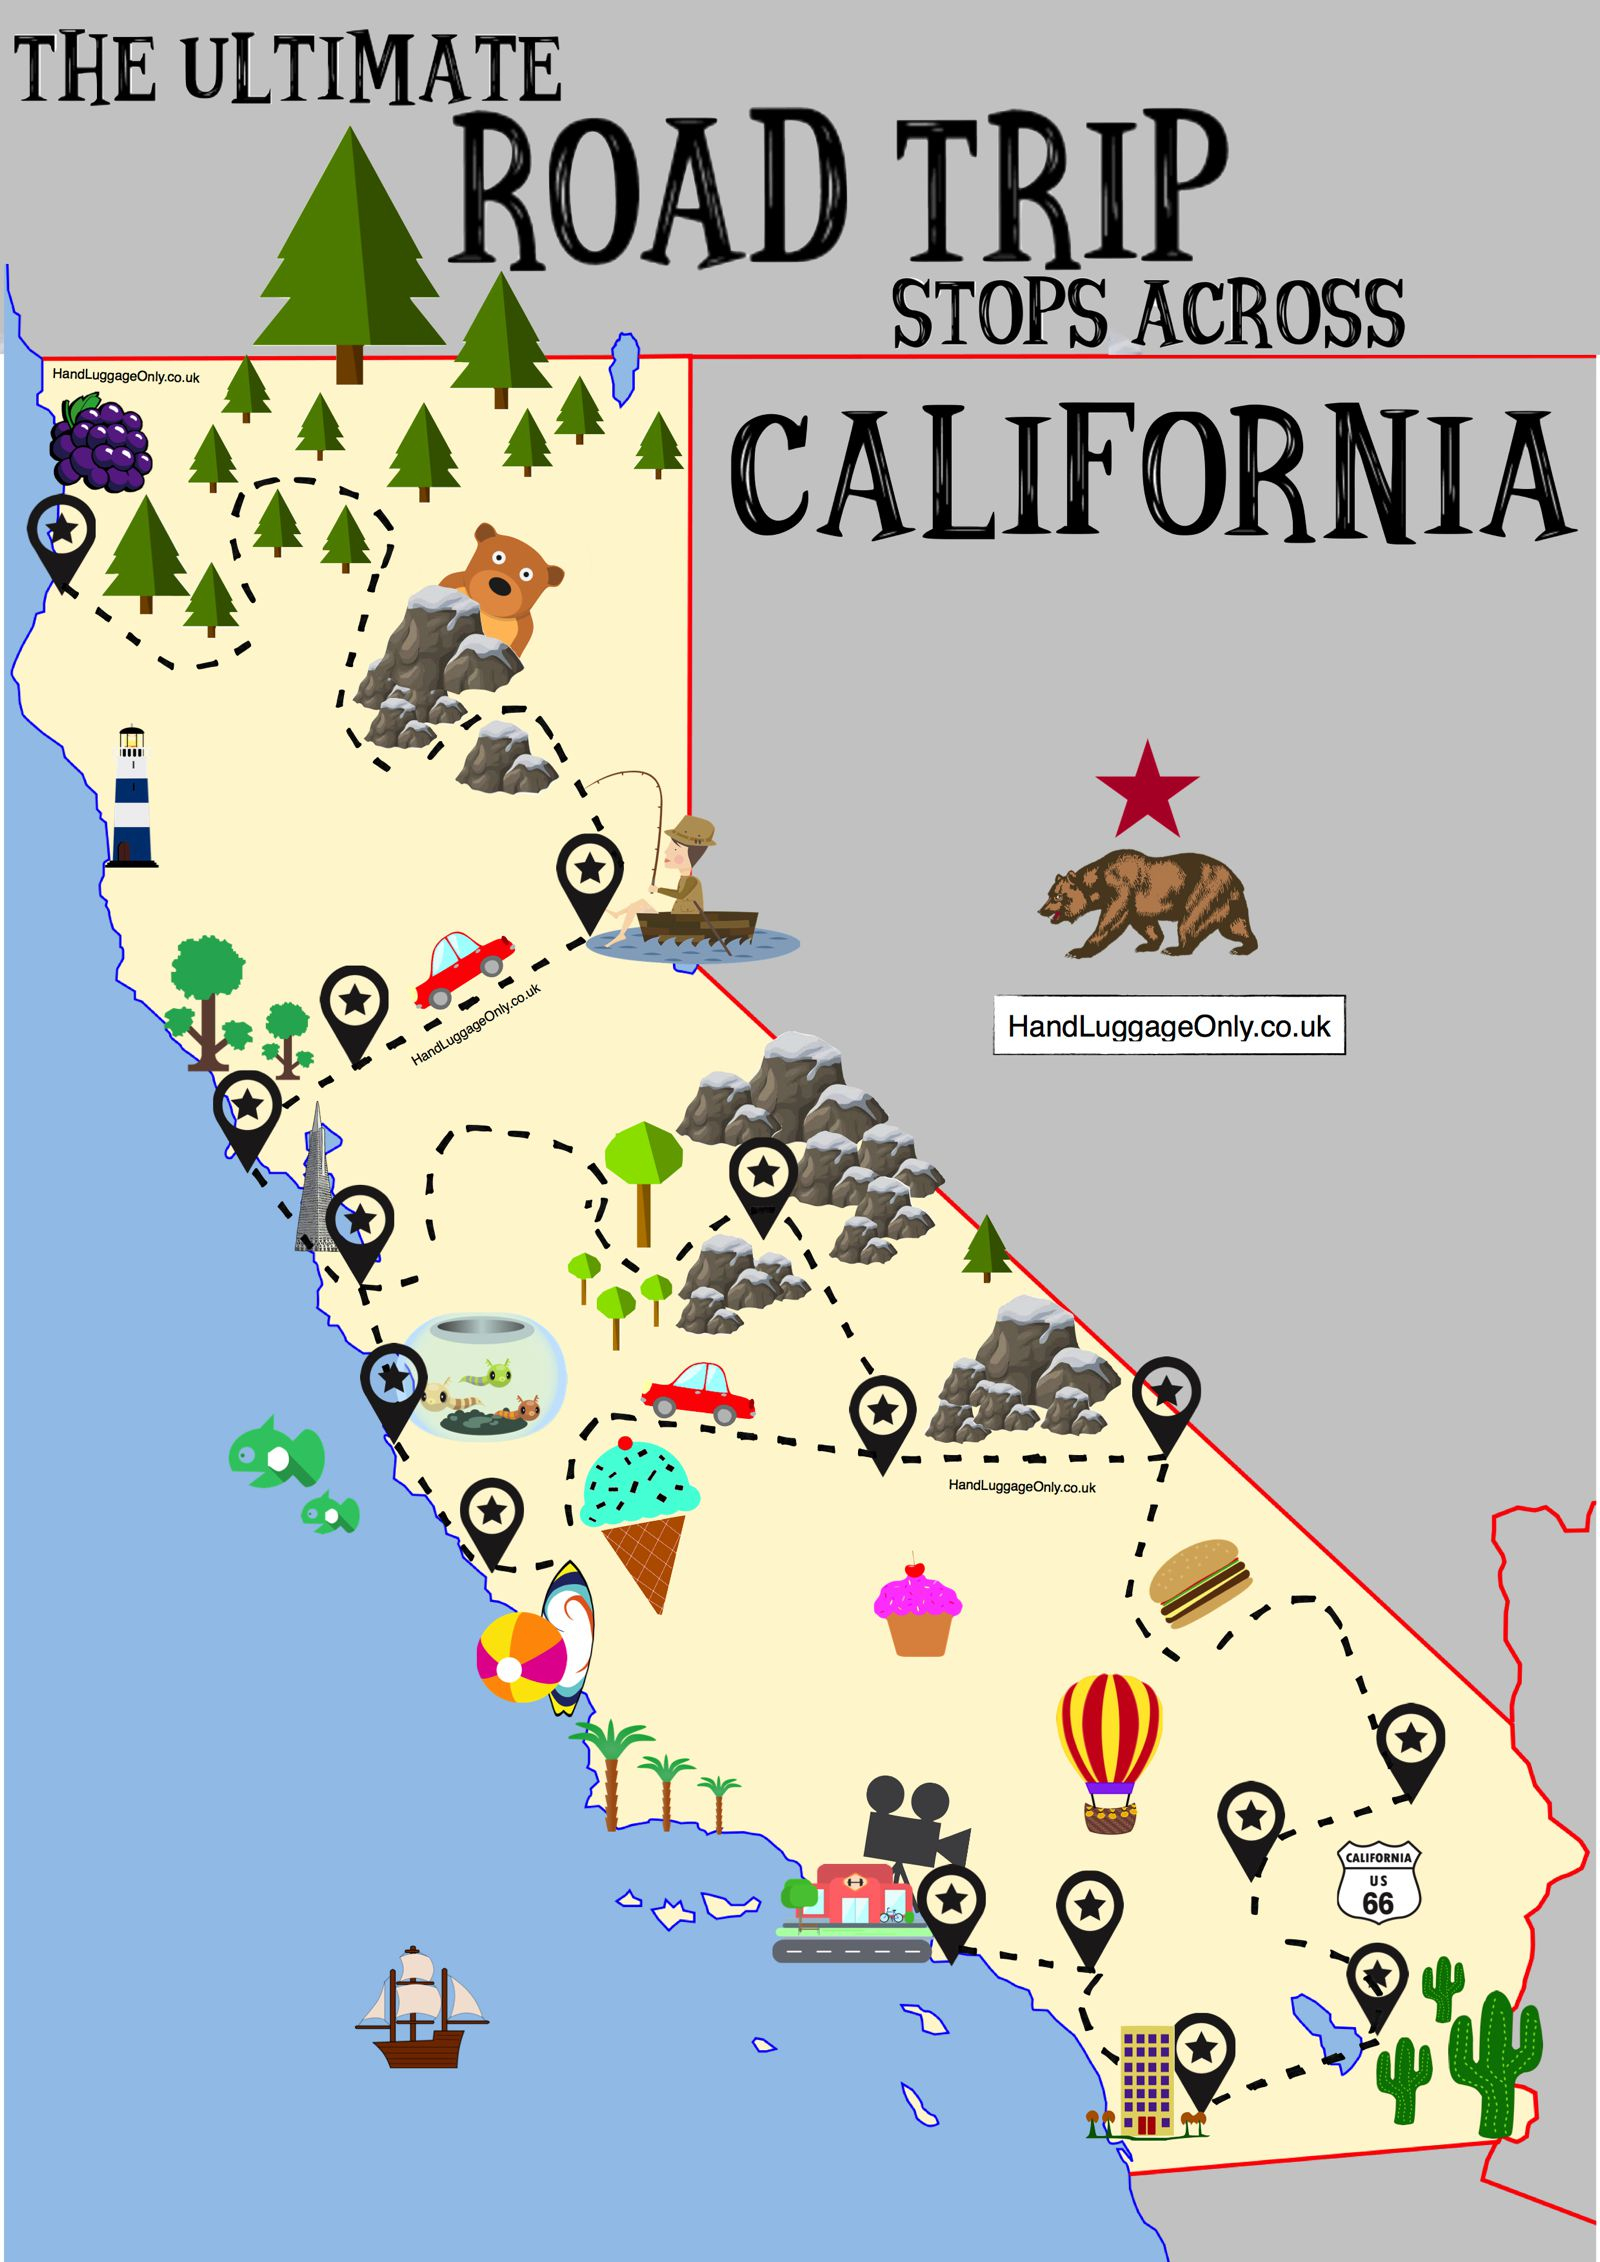 The Ultimate Road Trip Map Of Places To Visit In California - Hand - Sequoia National Park California Map